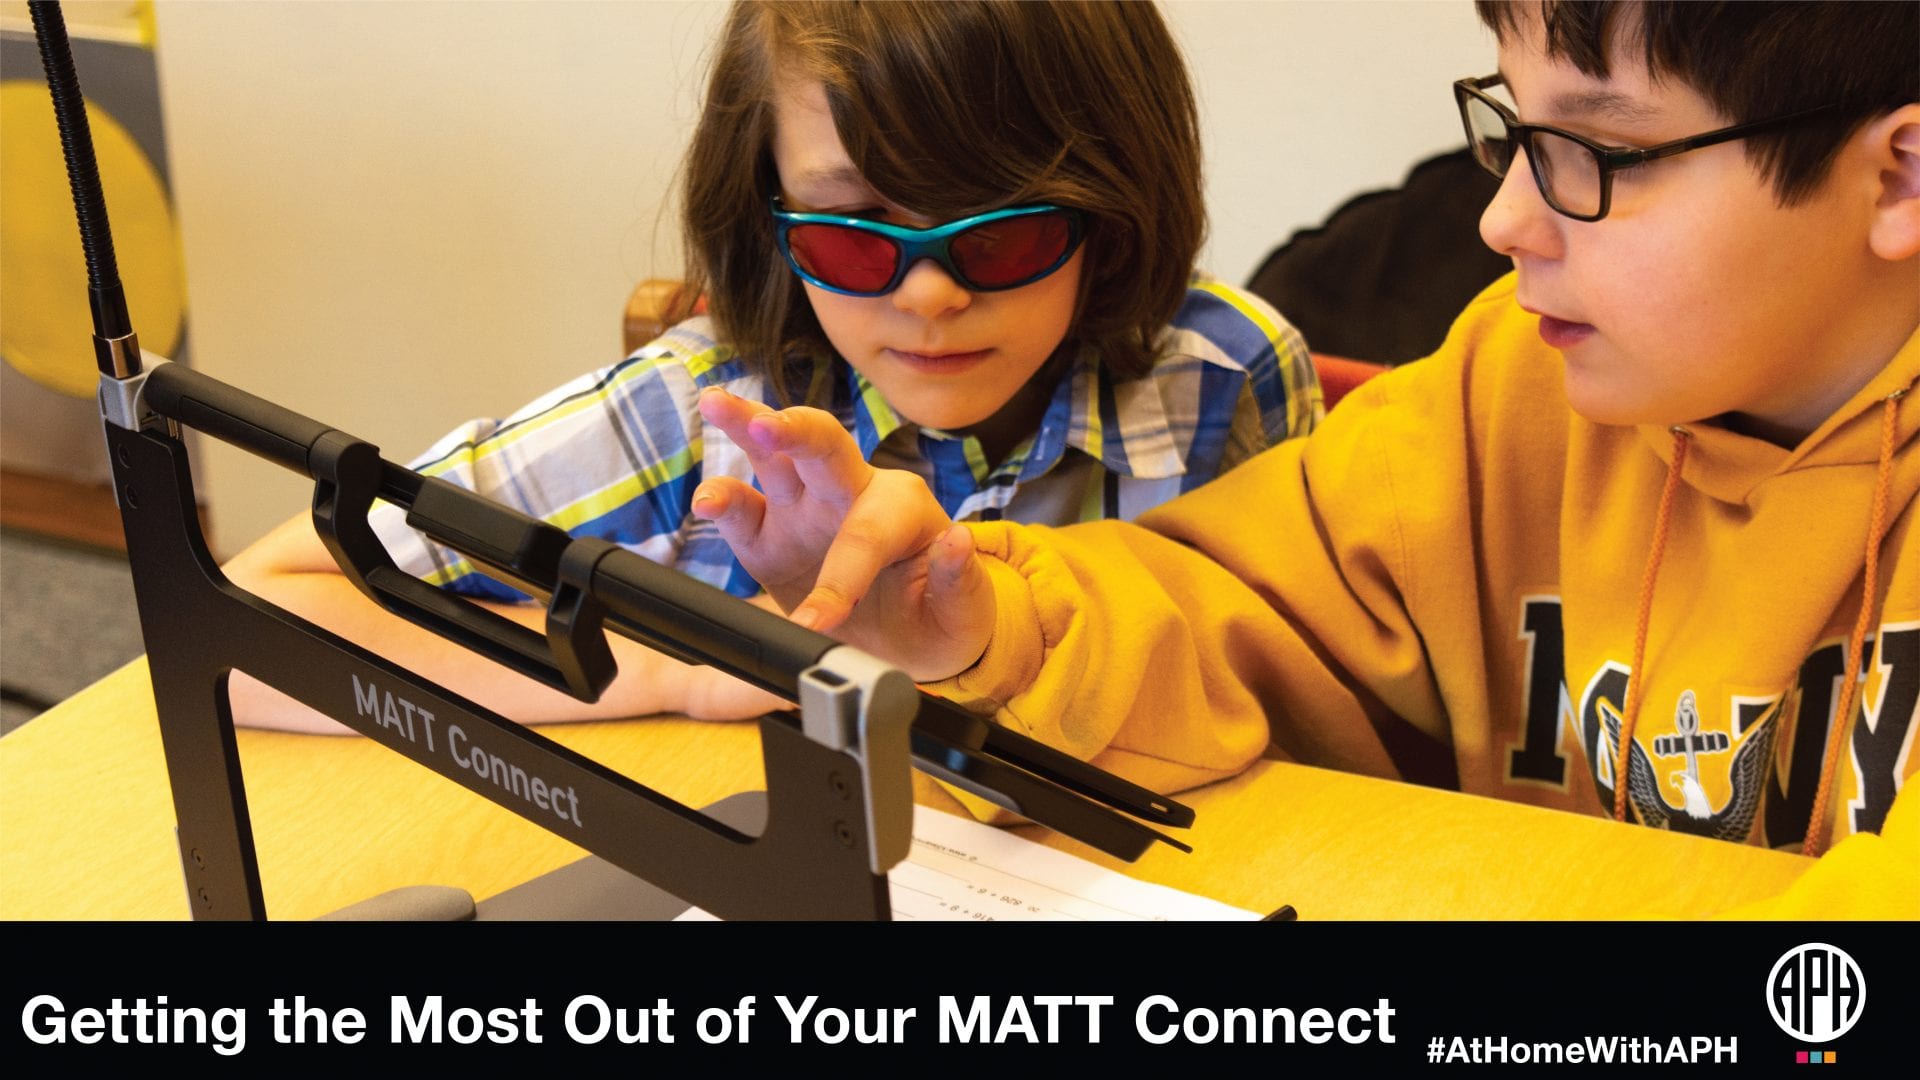 Two students using the MATT Connect. Text reads "Get the most out of your MATT Connect #AtHomeWithAPH"